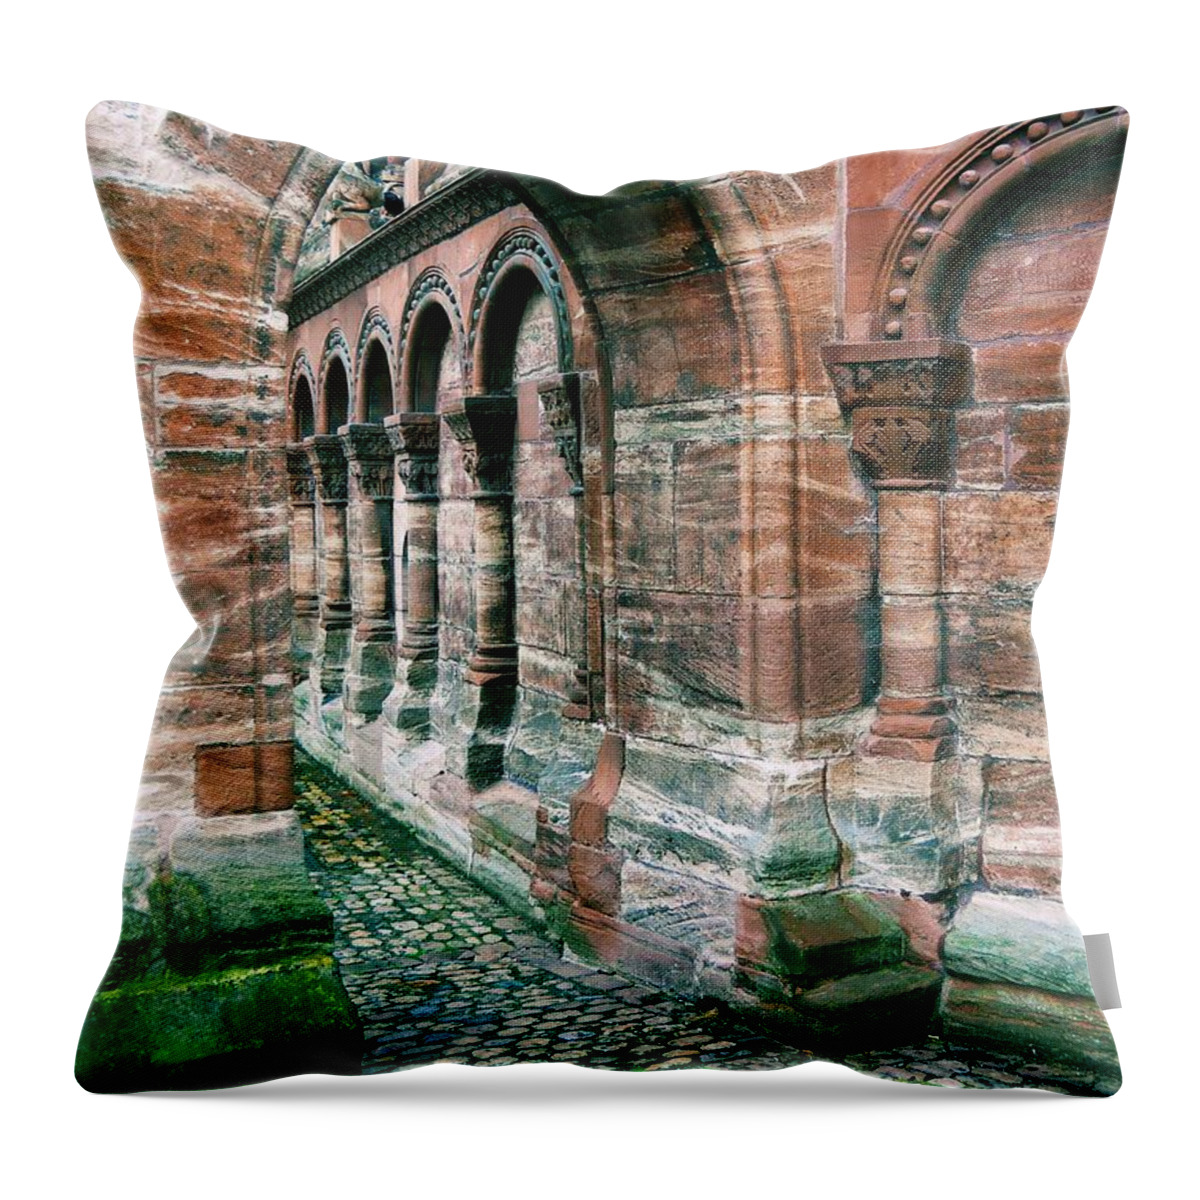 St. Martin's Church Throw Pillow featuring the digital art Arches and Cobblestone by Maria Huntley